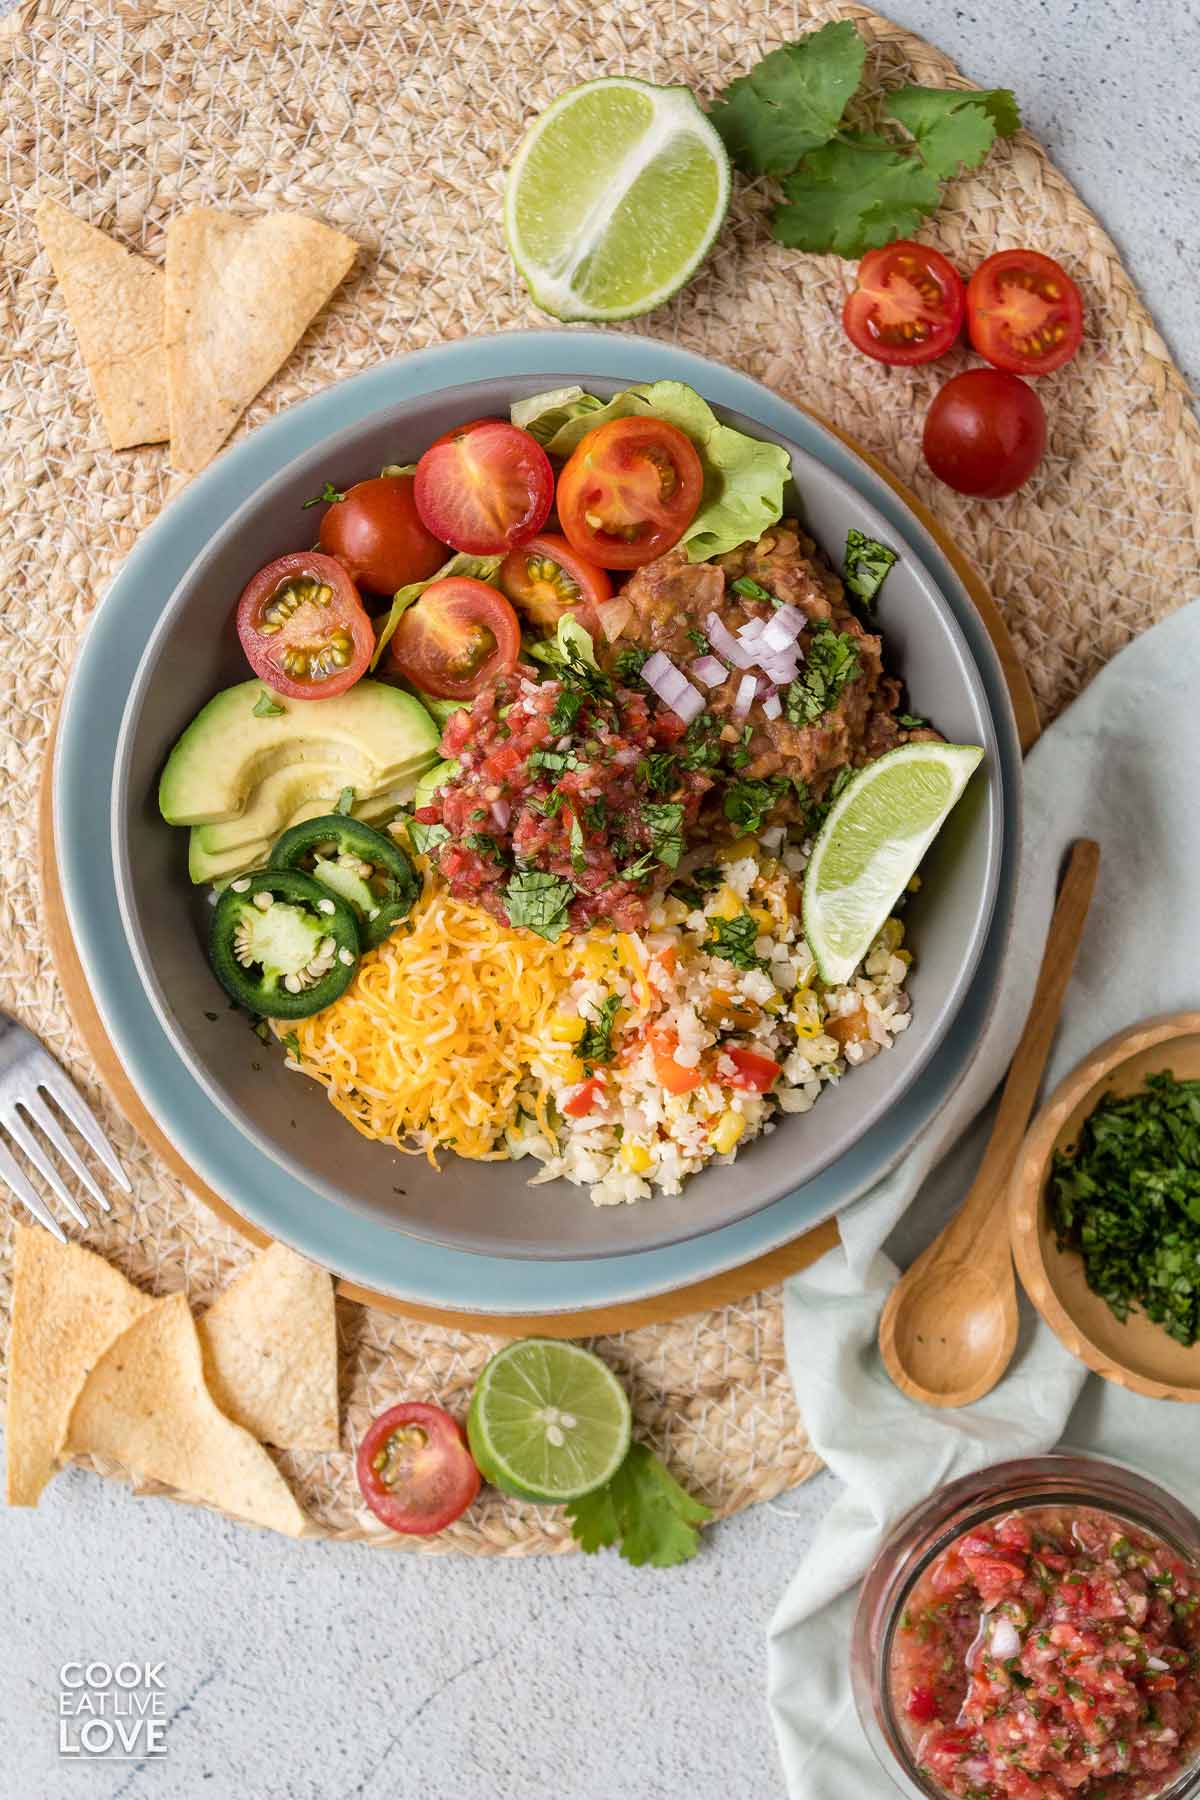 Overhead shot of a vegetarian burrito bowl on the table ready to eat.